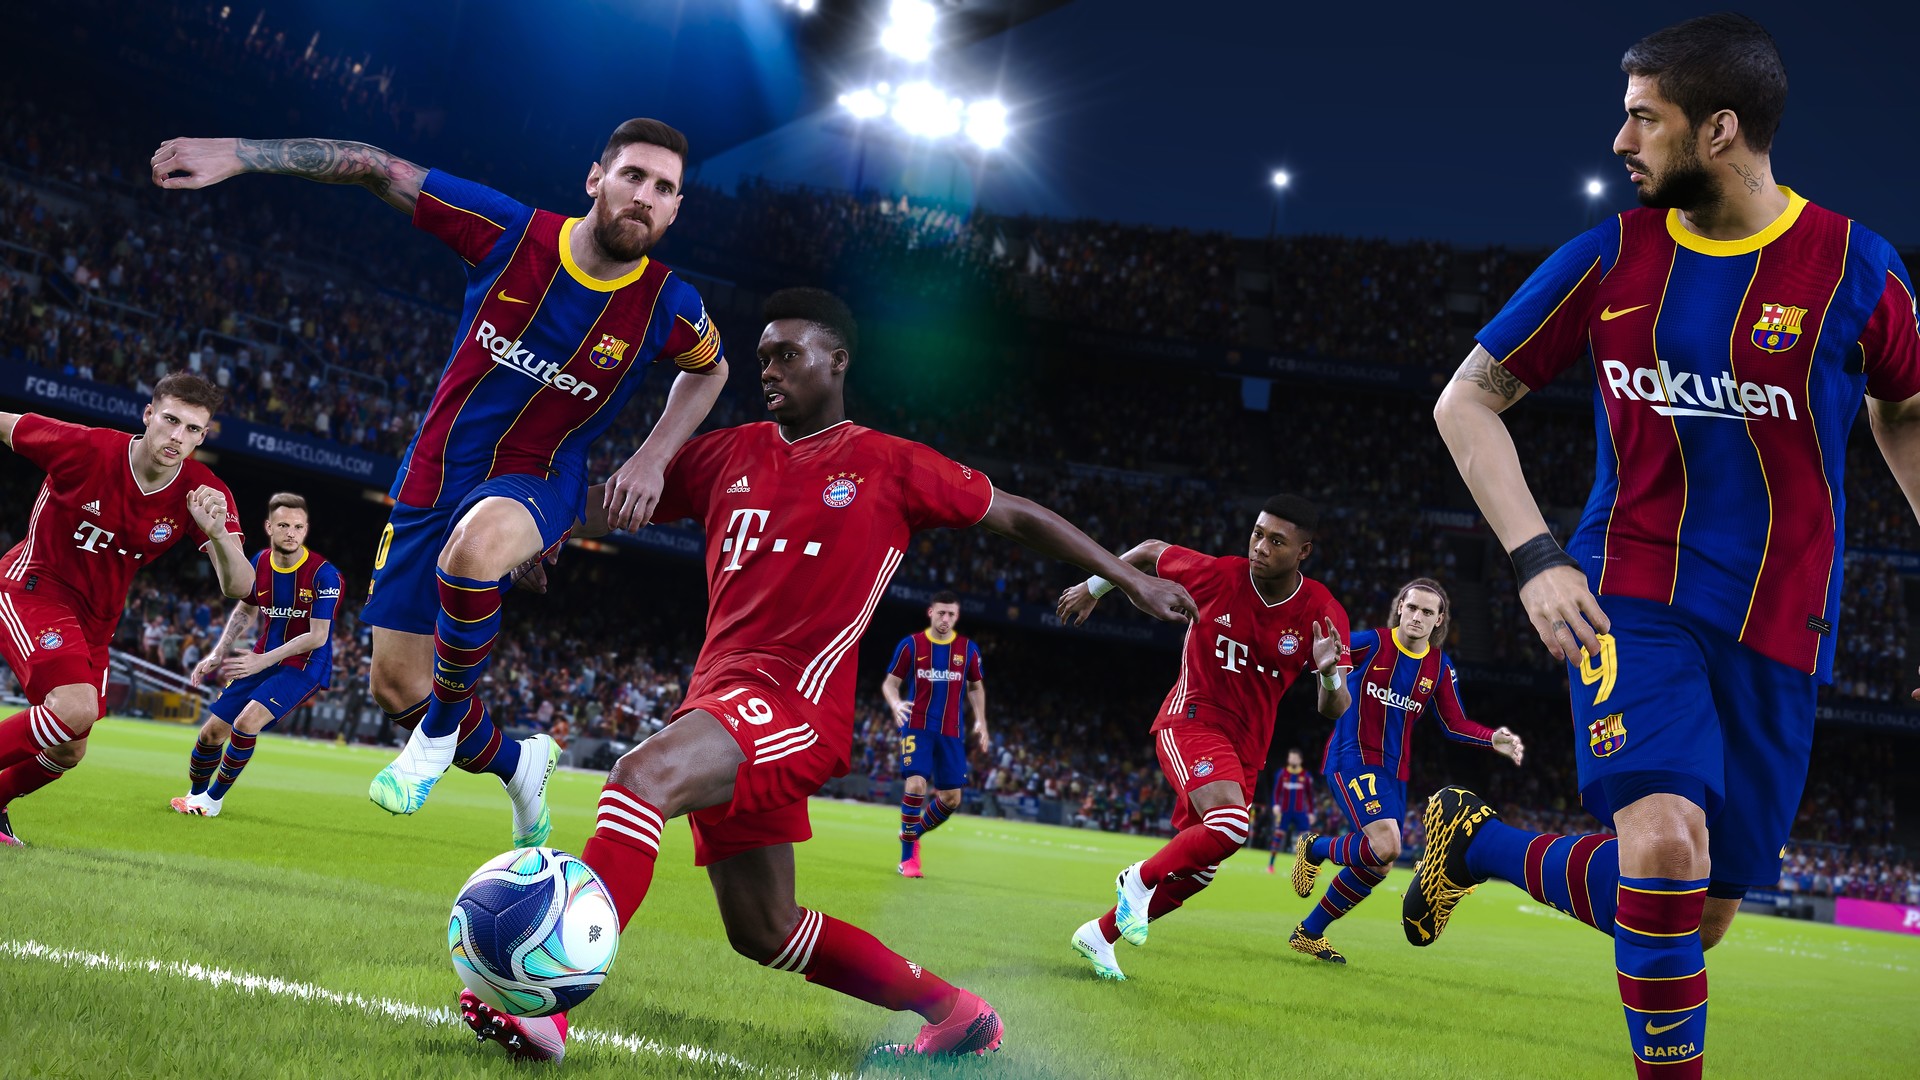 Download eFootball PES 2021